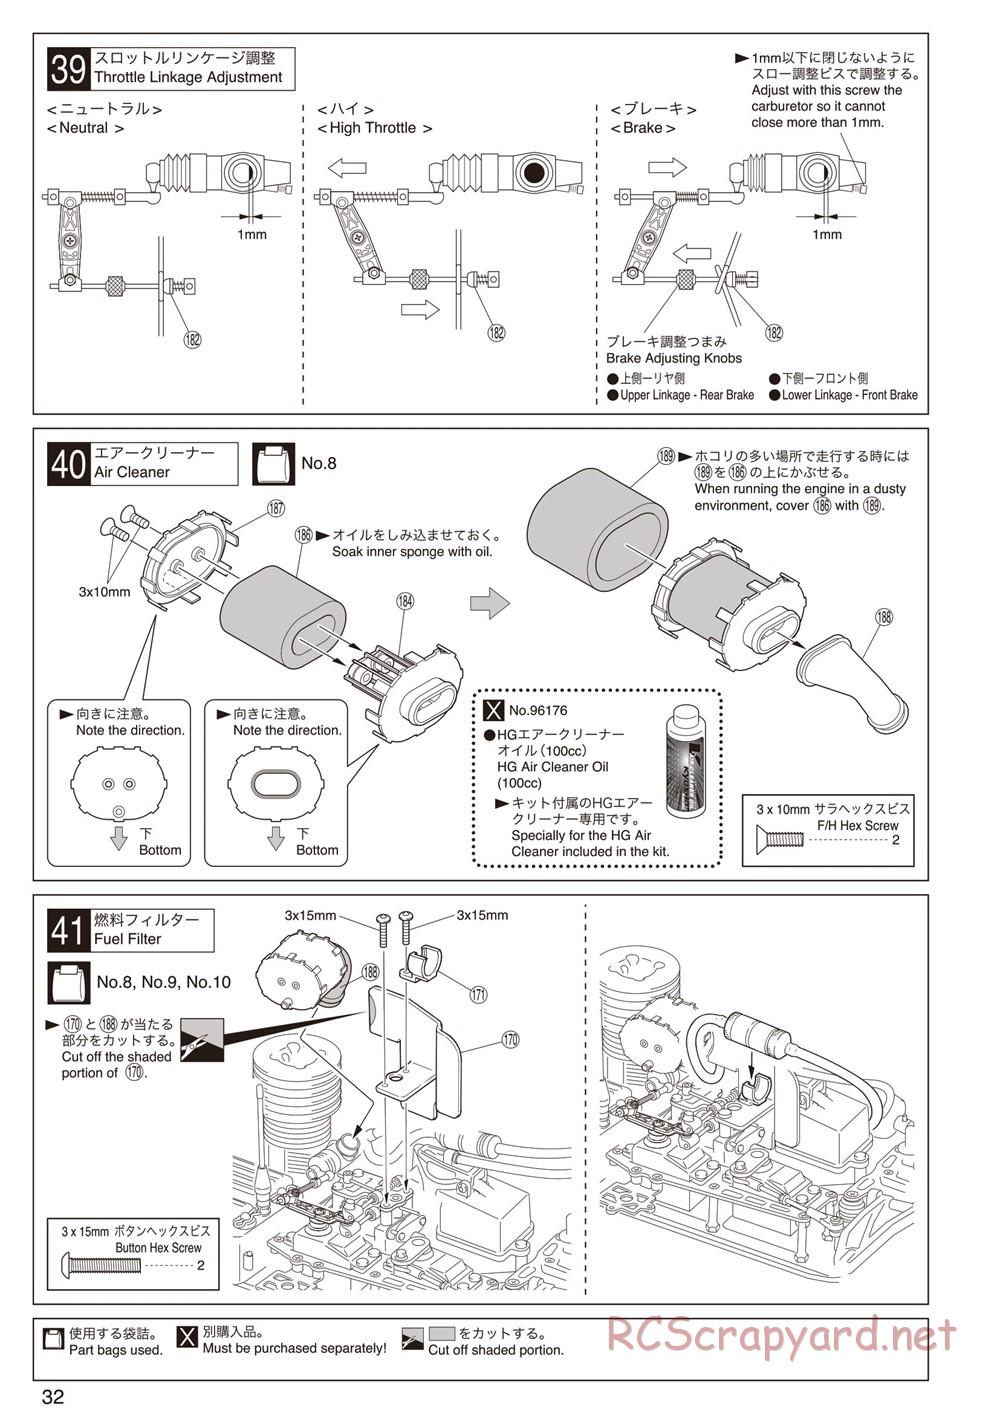 Kyosho - Inferno ST-RR Evo.2 - Manual - Page 36